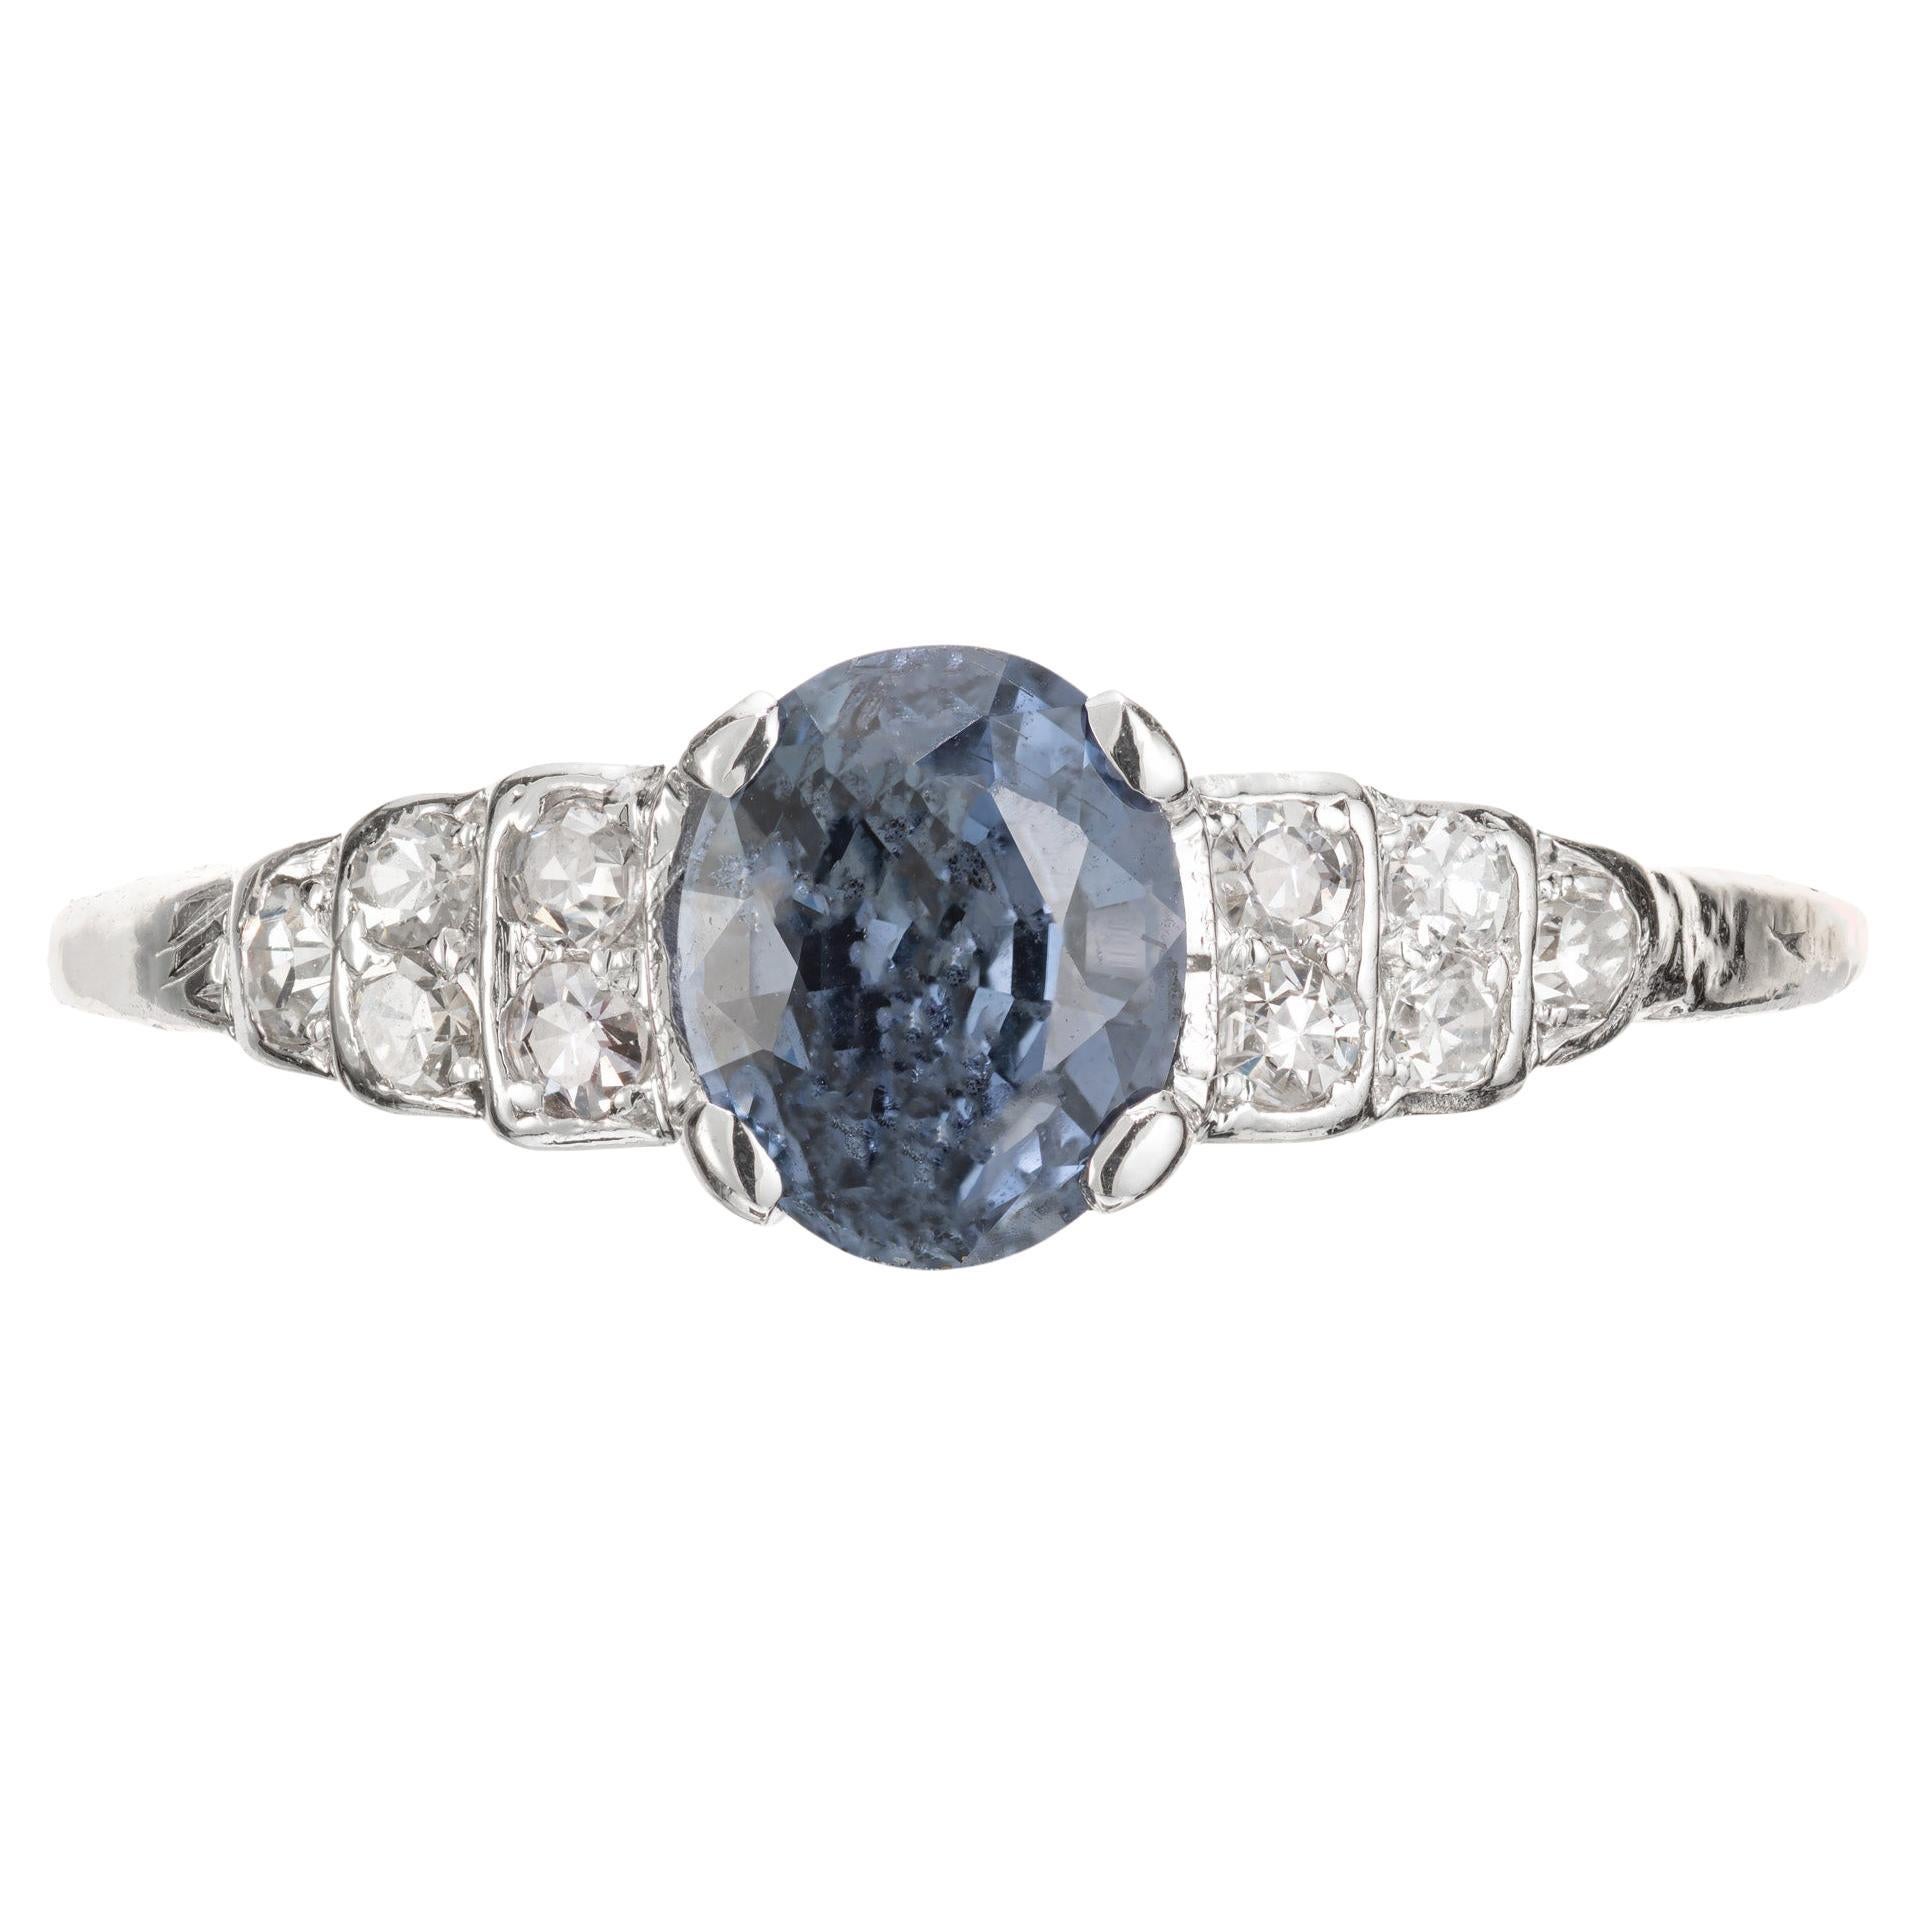 Vintage 1950's estate natural blue oval sapphire and diamond engagement ring. GIA certified sapphire center stone. Natural color with a hint of periwinkle, simple heat only in a platinum setting with 10 single cut accent diamonds.  

1 oval blue SI